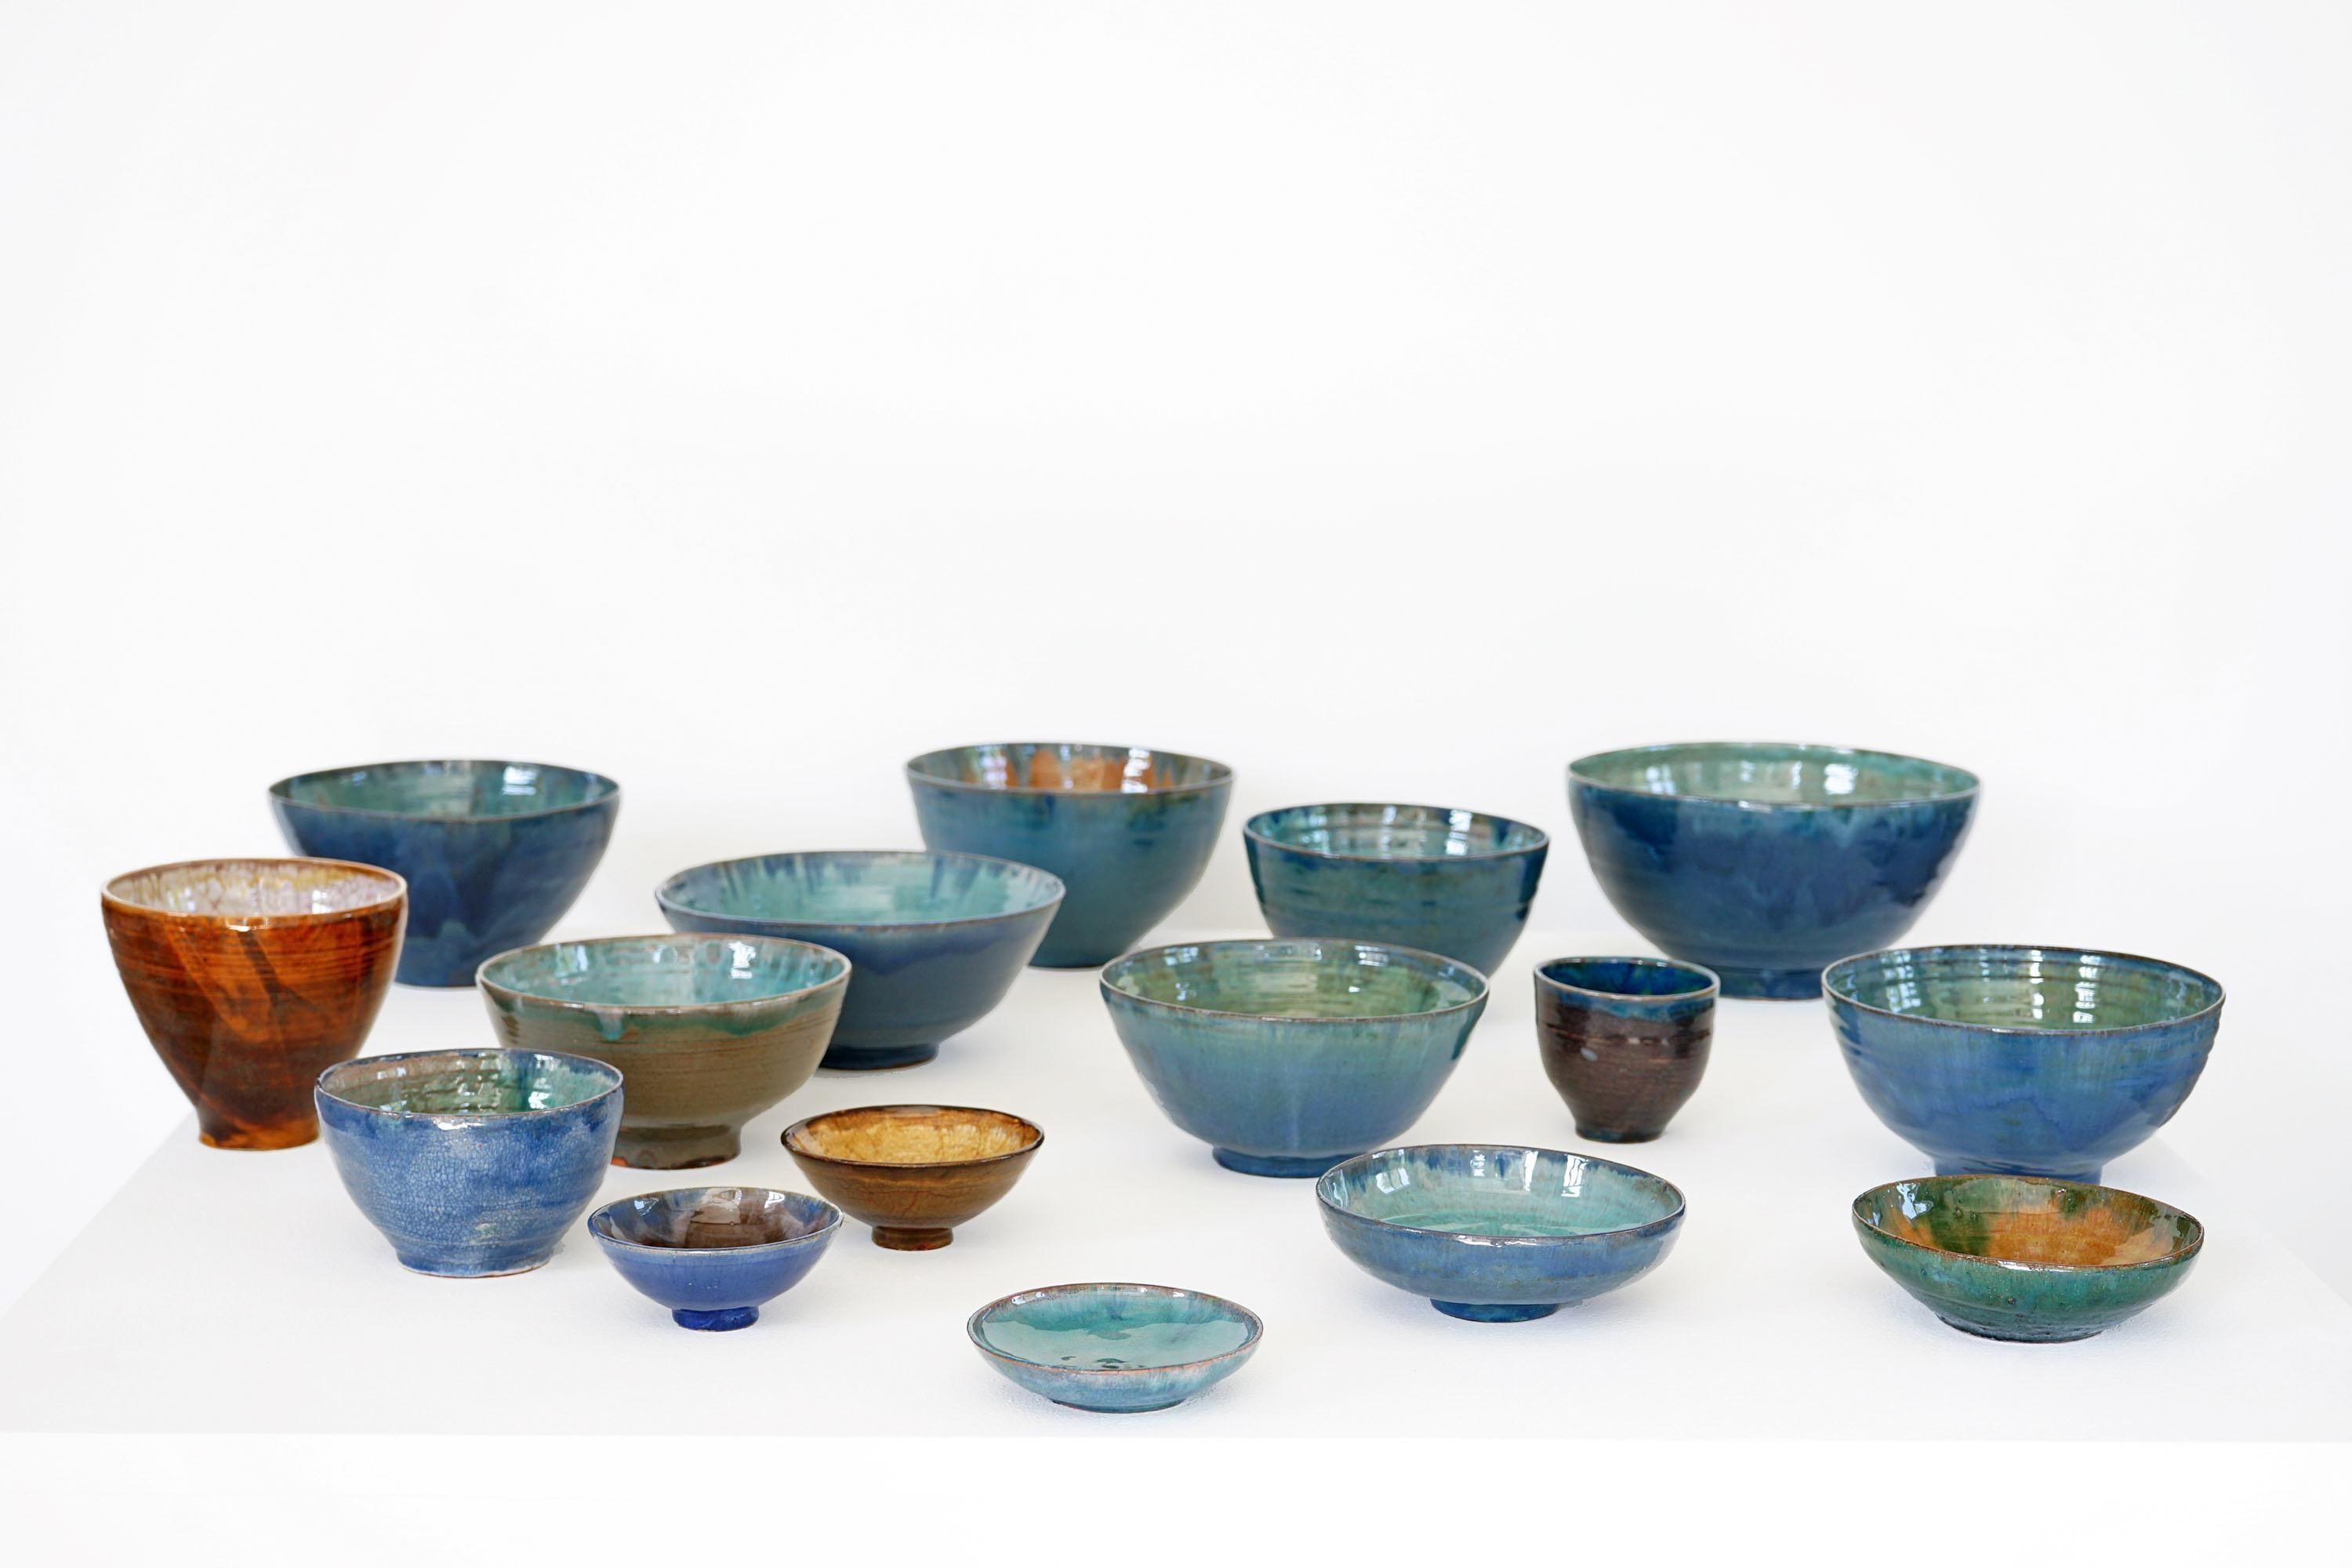 This beautiful set of handmade ceramics consists of 16 bowls, all of which differ in size and color. Since they come from the same artist but different painting techniques were used, an exceptionally beautiful combination of colors and patterns was